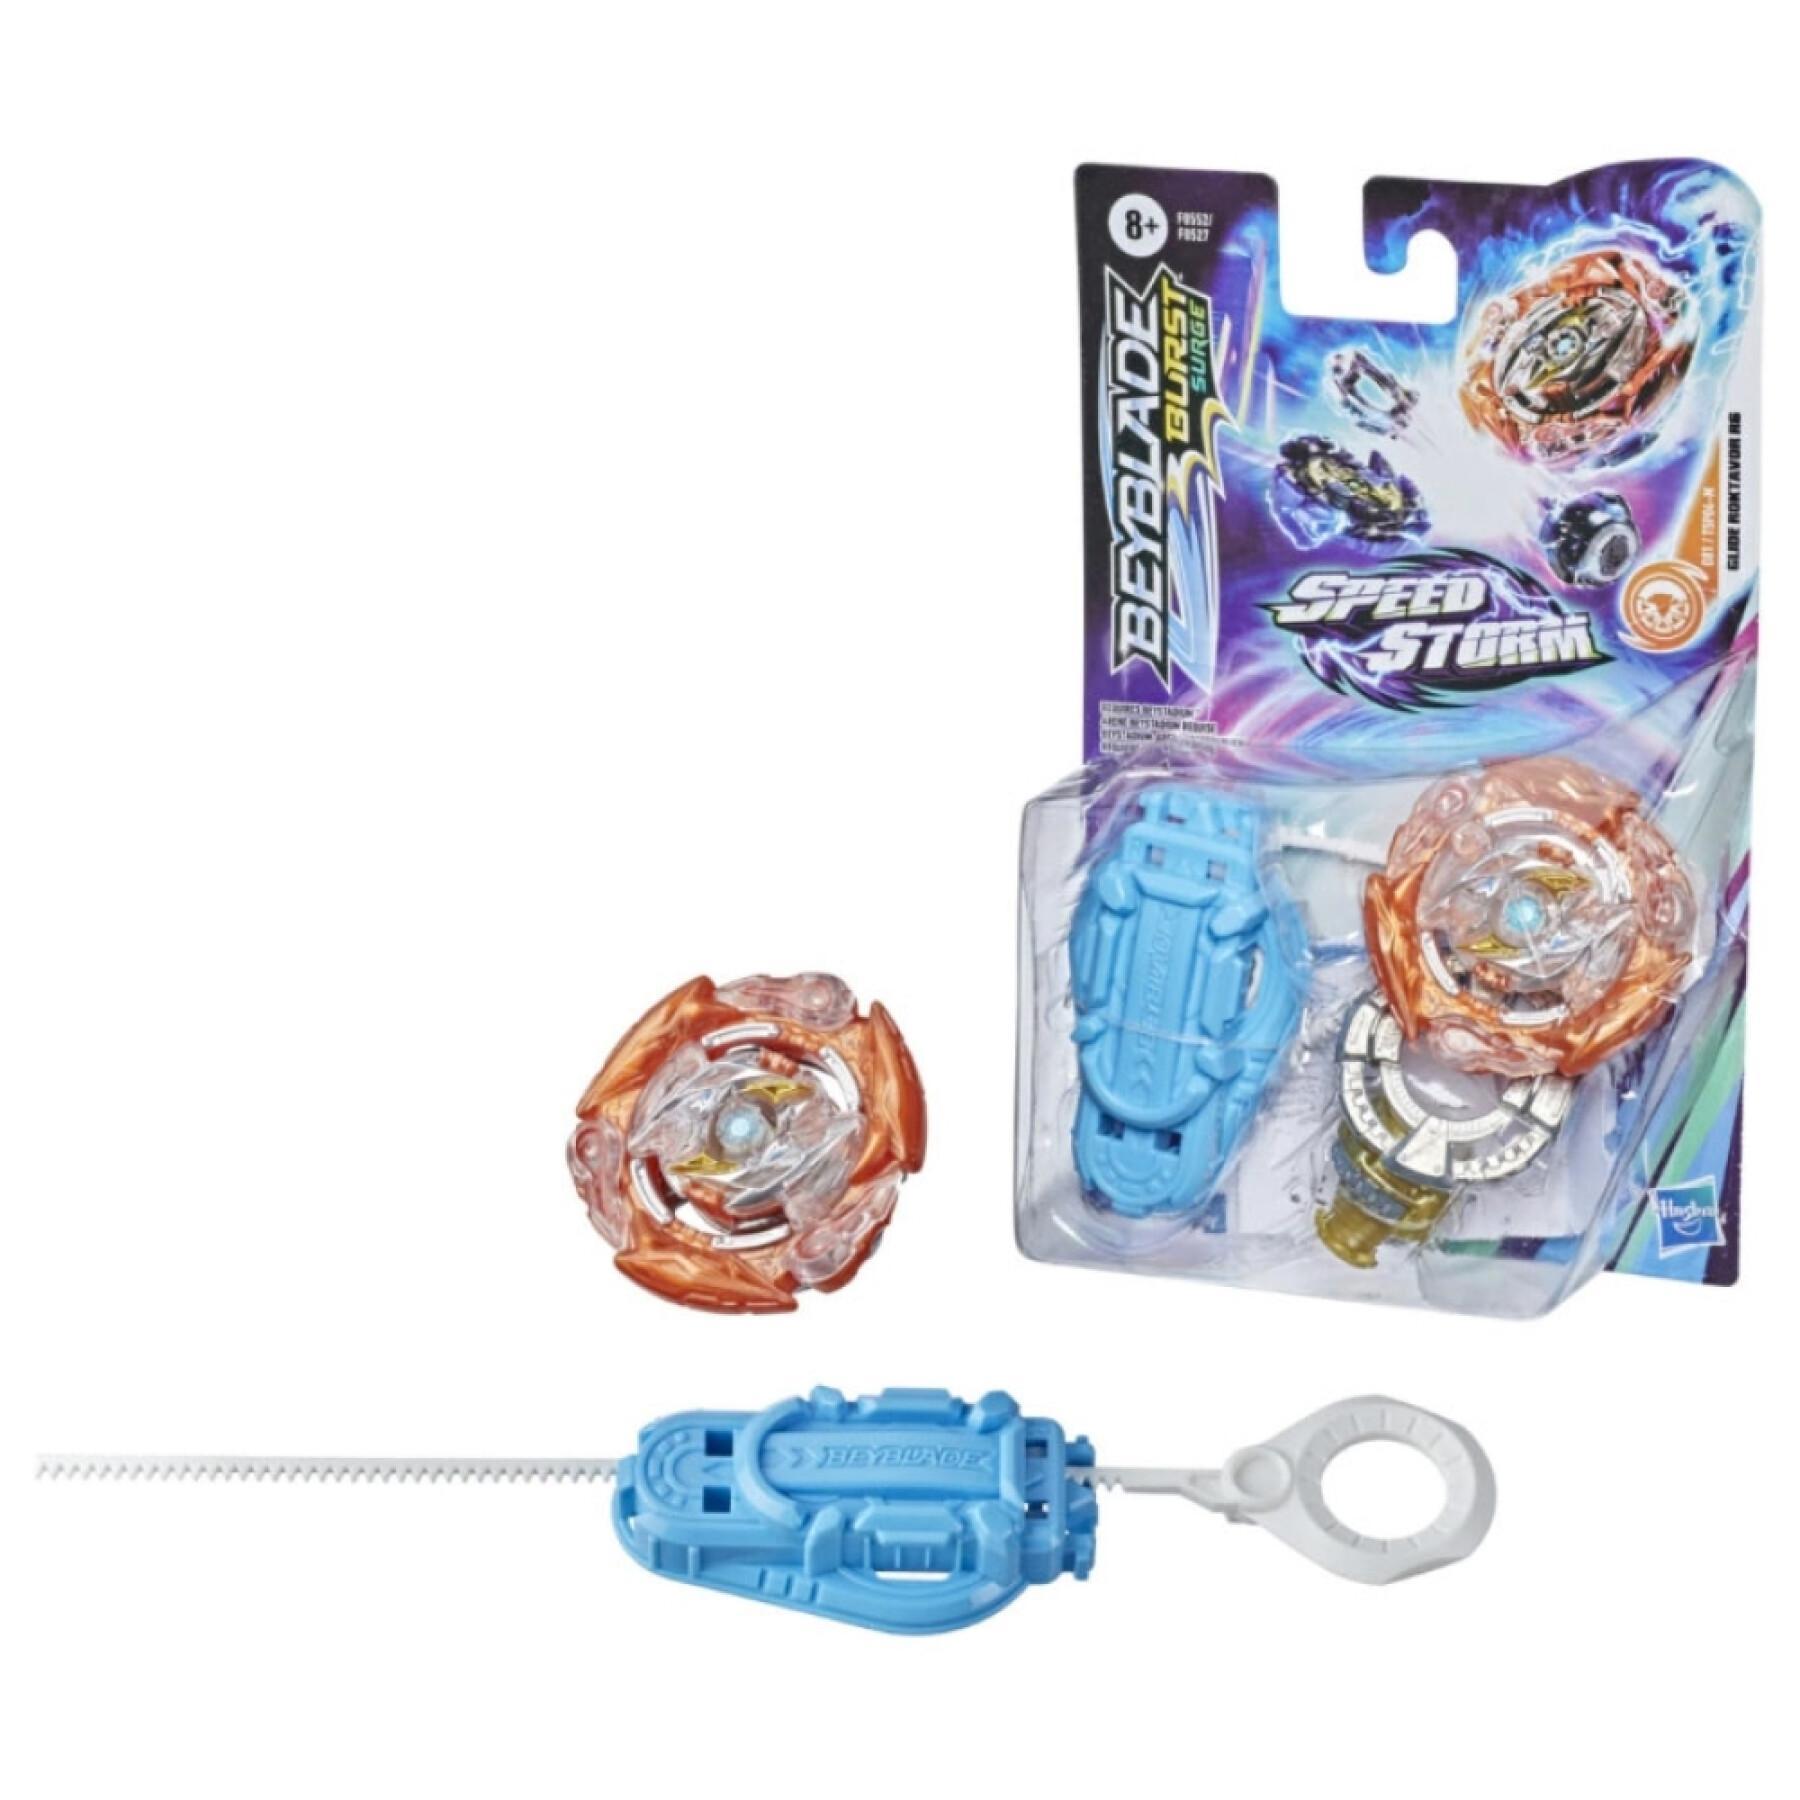 Spinning top and launcher pack Hasbro Beyblade